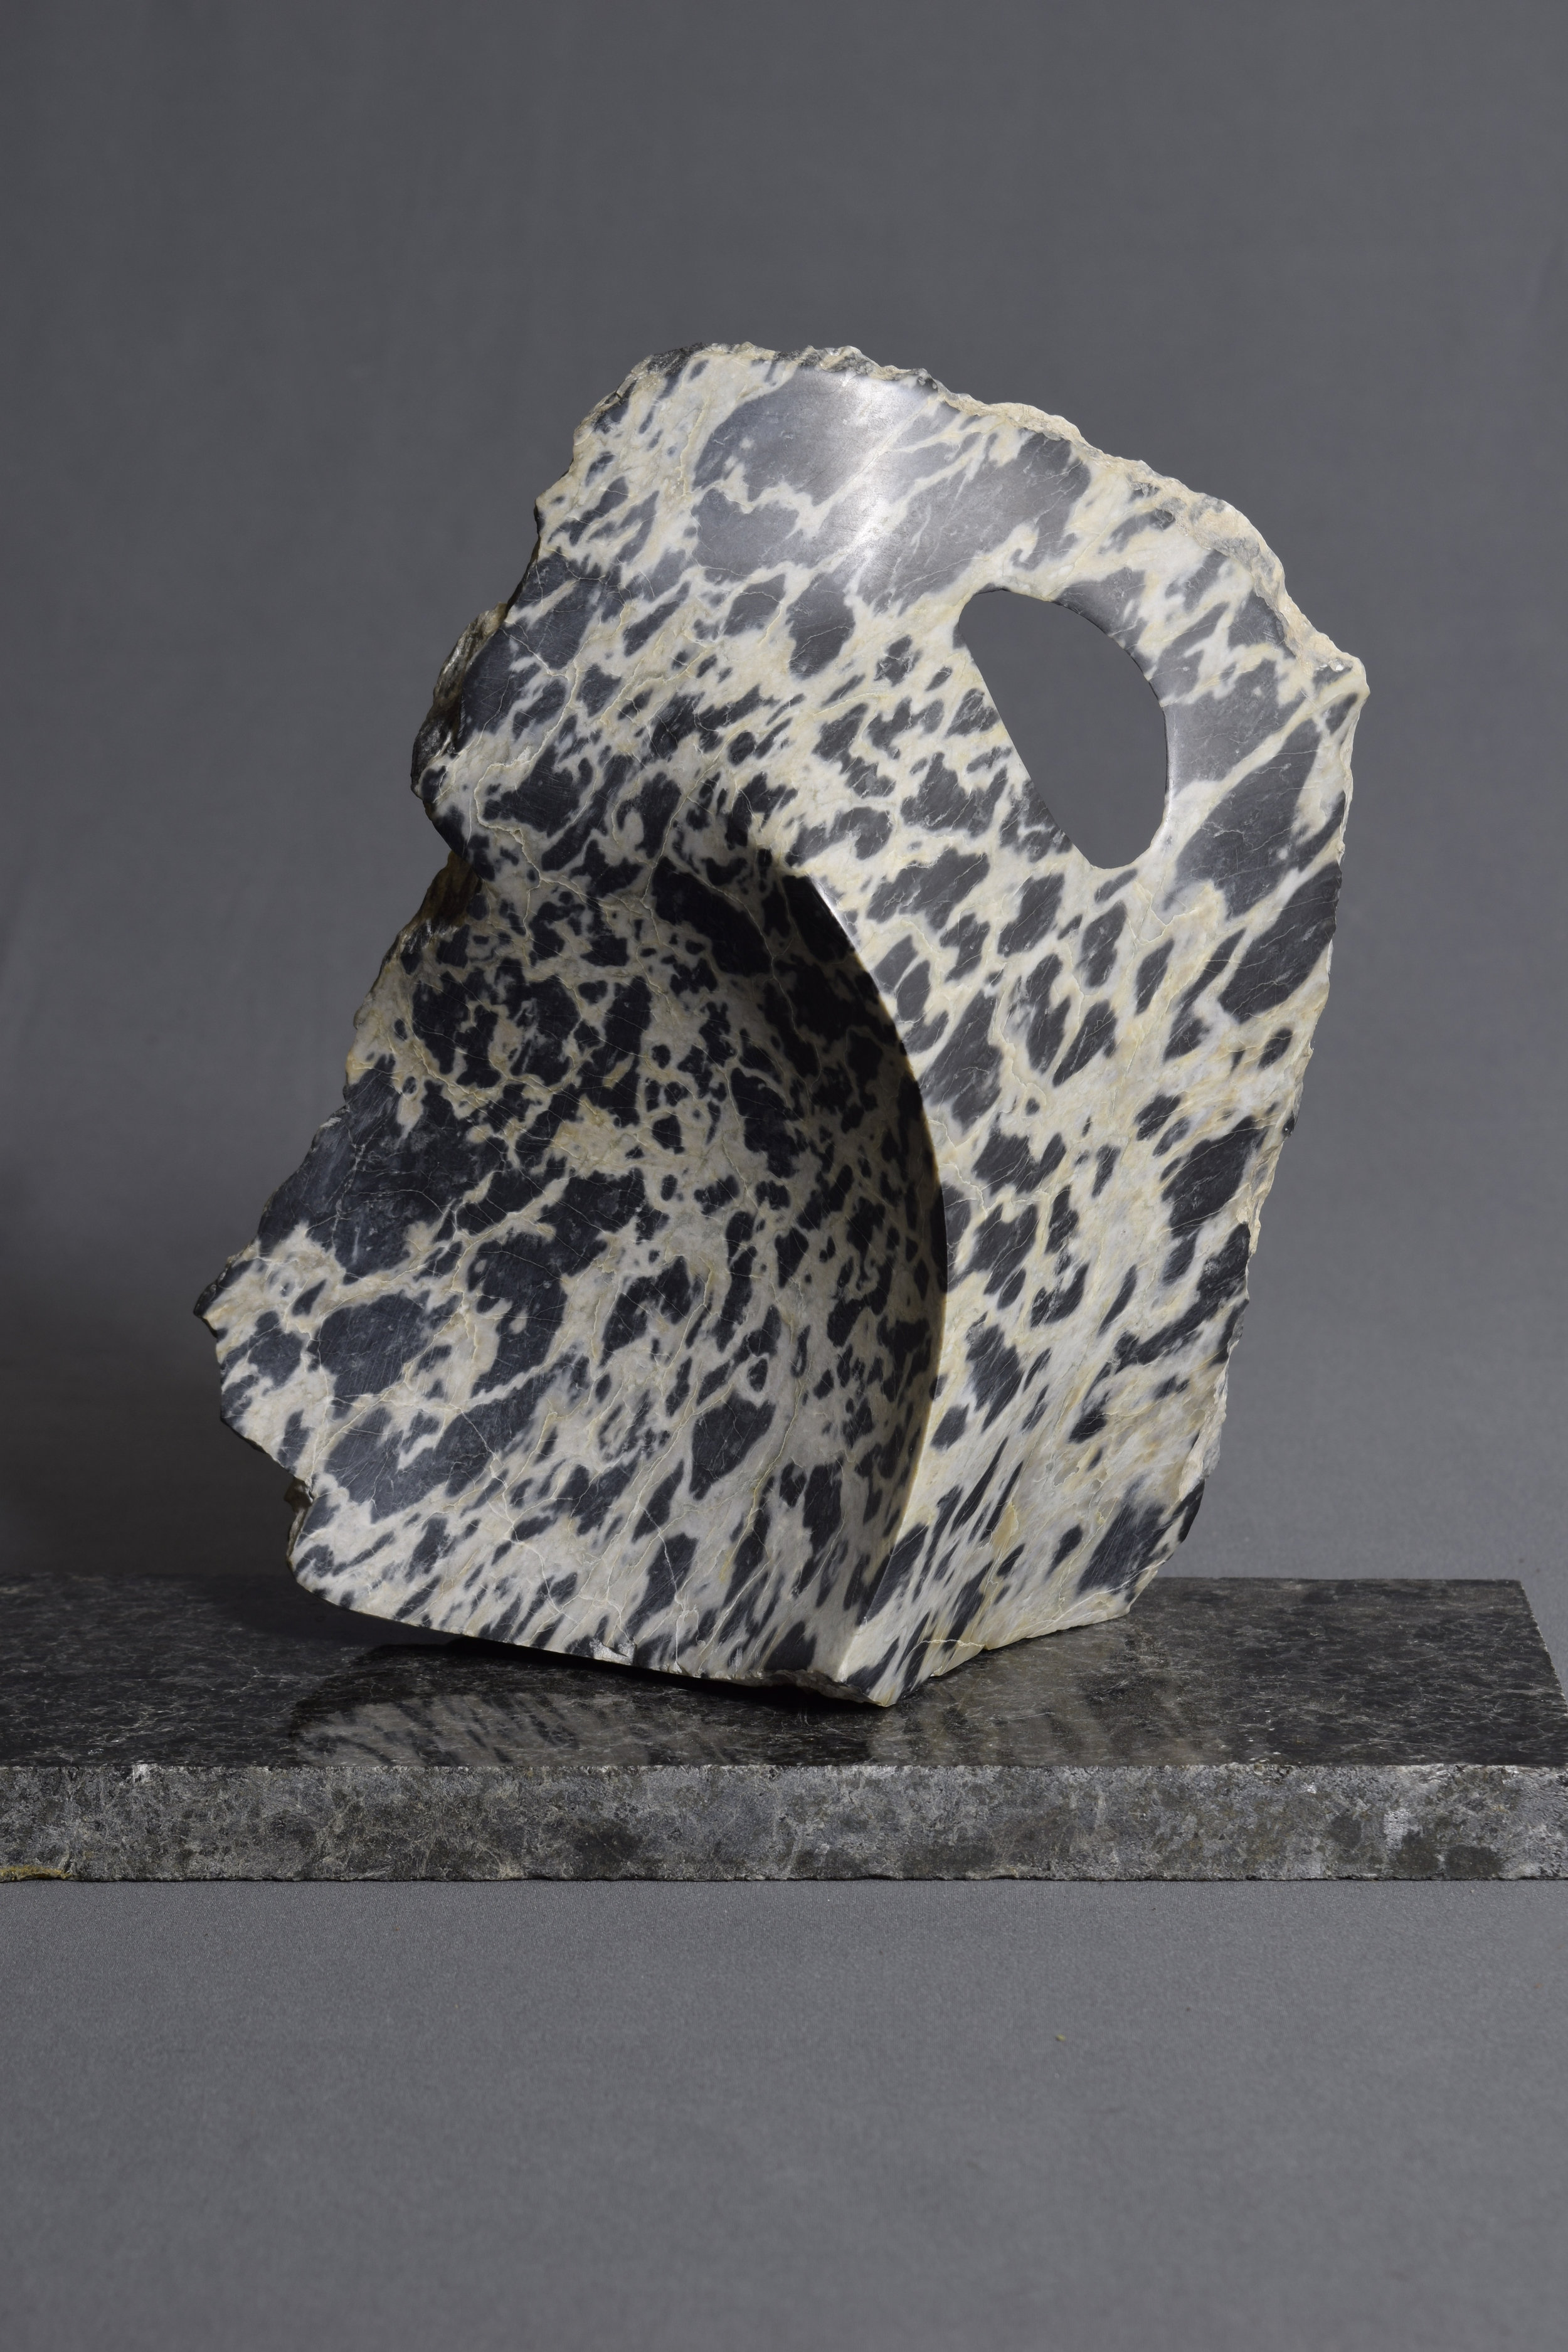 Abstract Erosion, Leopard Marble 2018, 12x5.5x10in